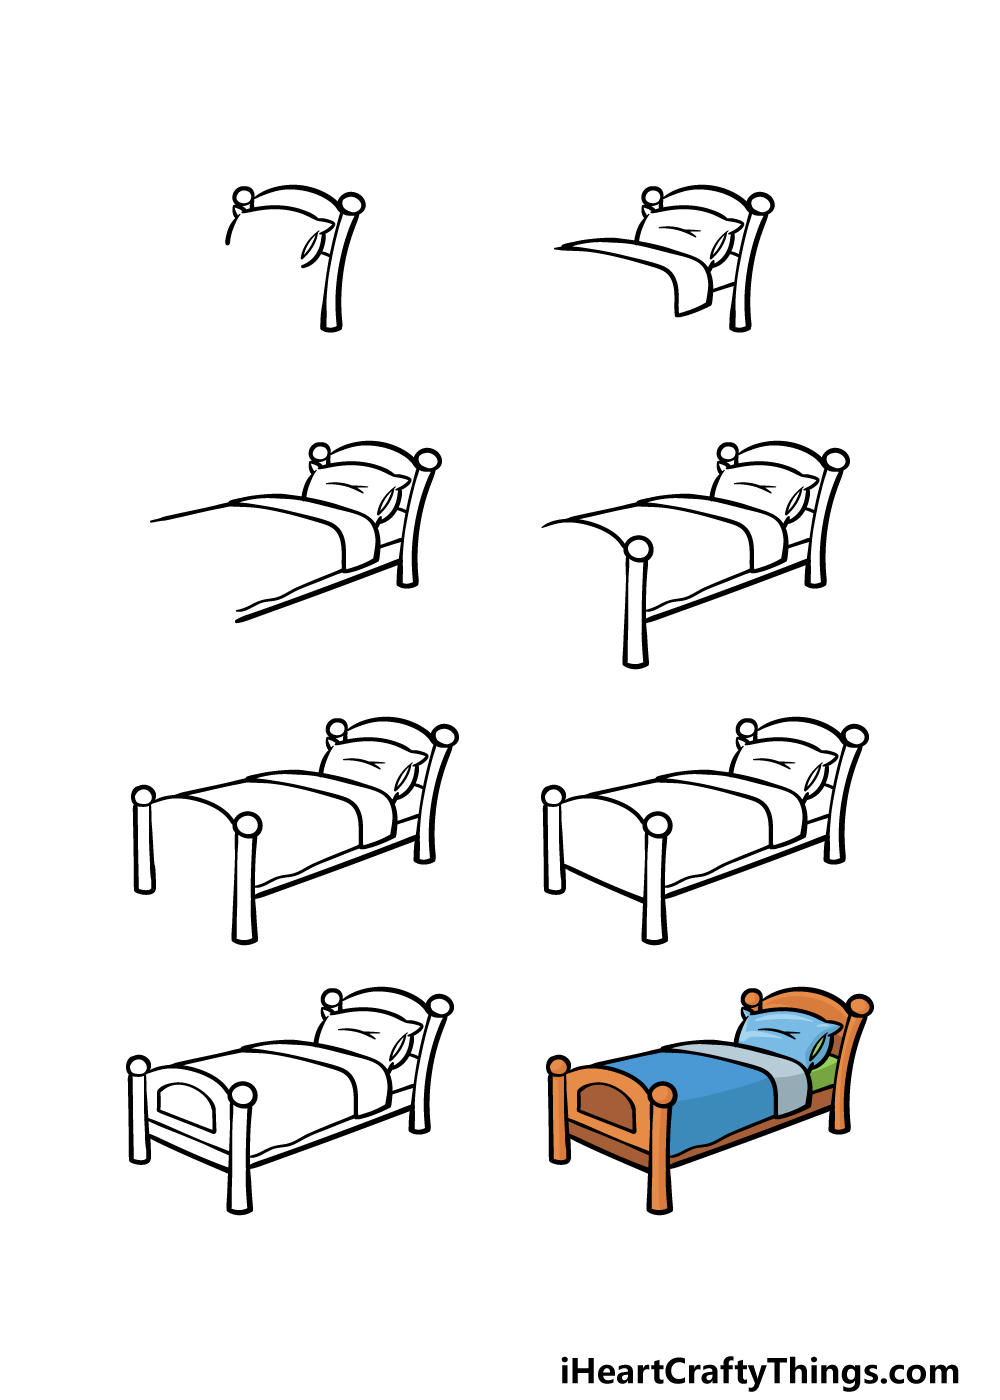 Cartoon Bed Drawing - How To Draw A Cartoon Bed Step By Step